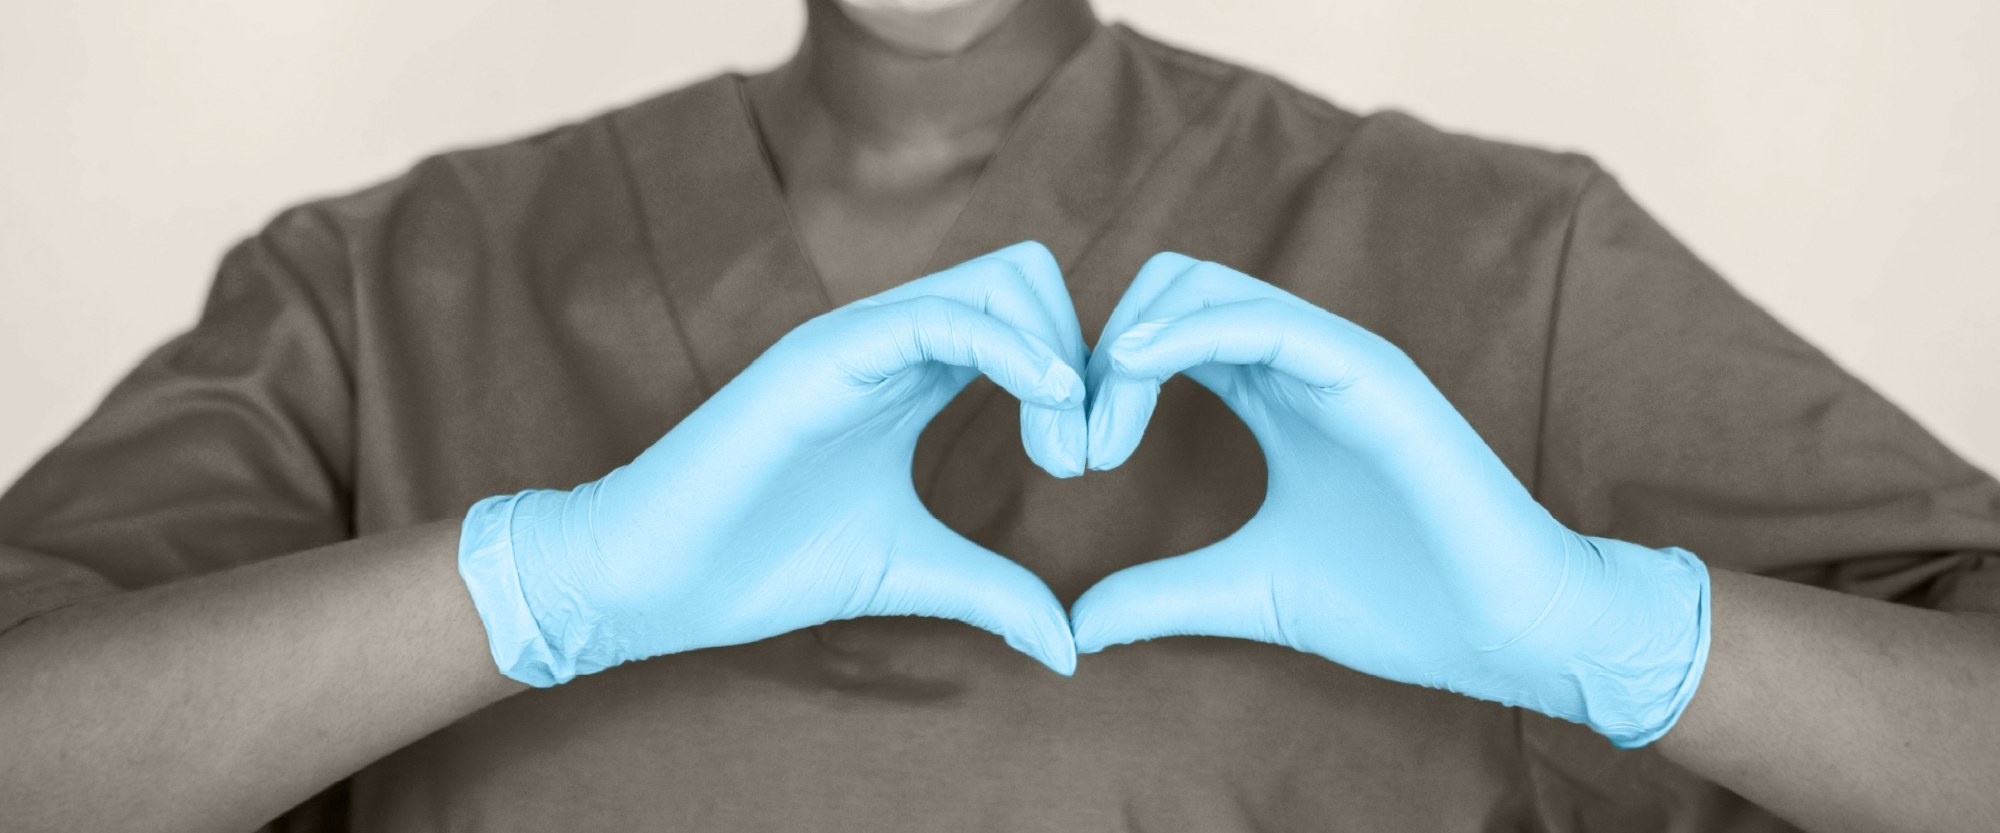 nurse with blue gloves forming a heart with their hands